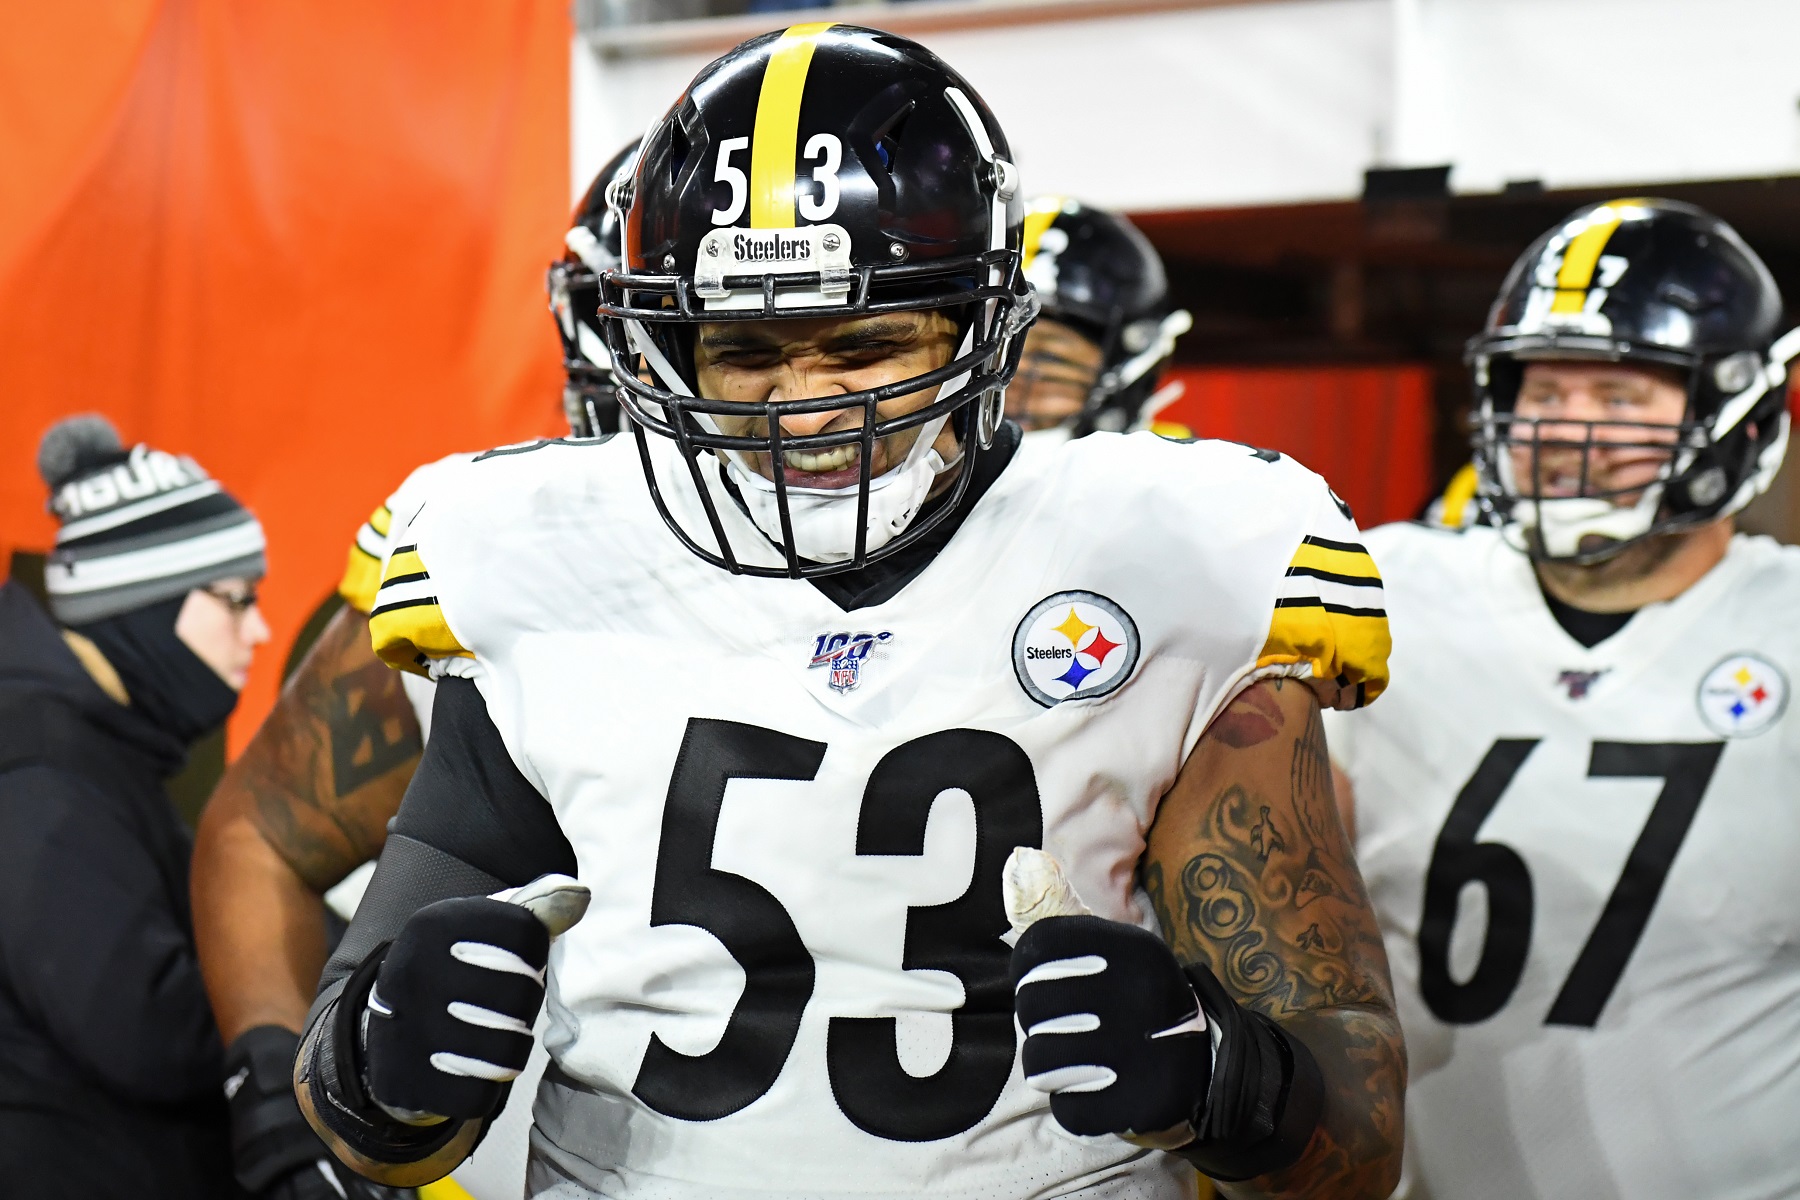 Maurkice Pouncey, Pittsburgh Steelers